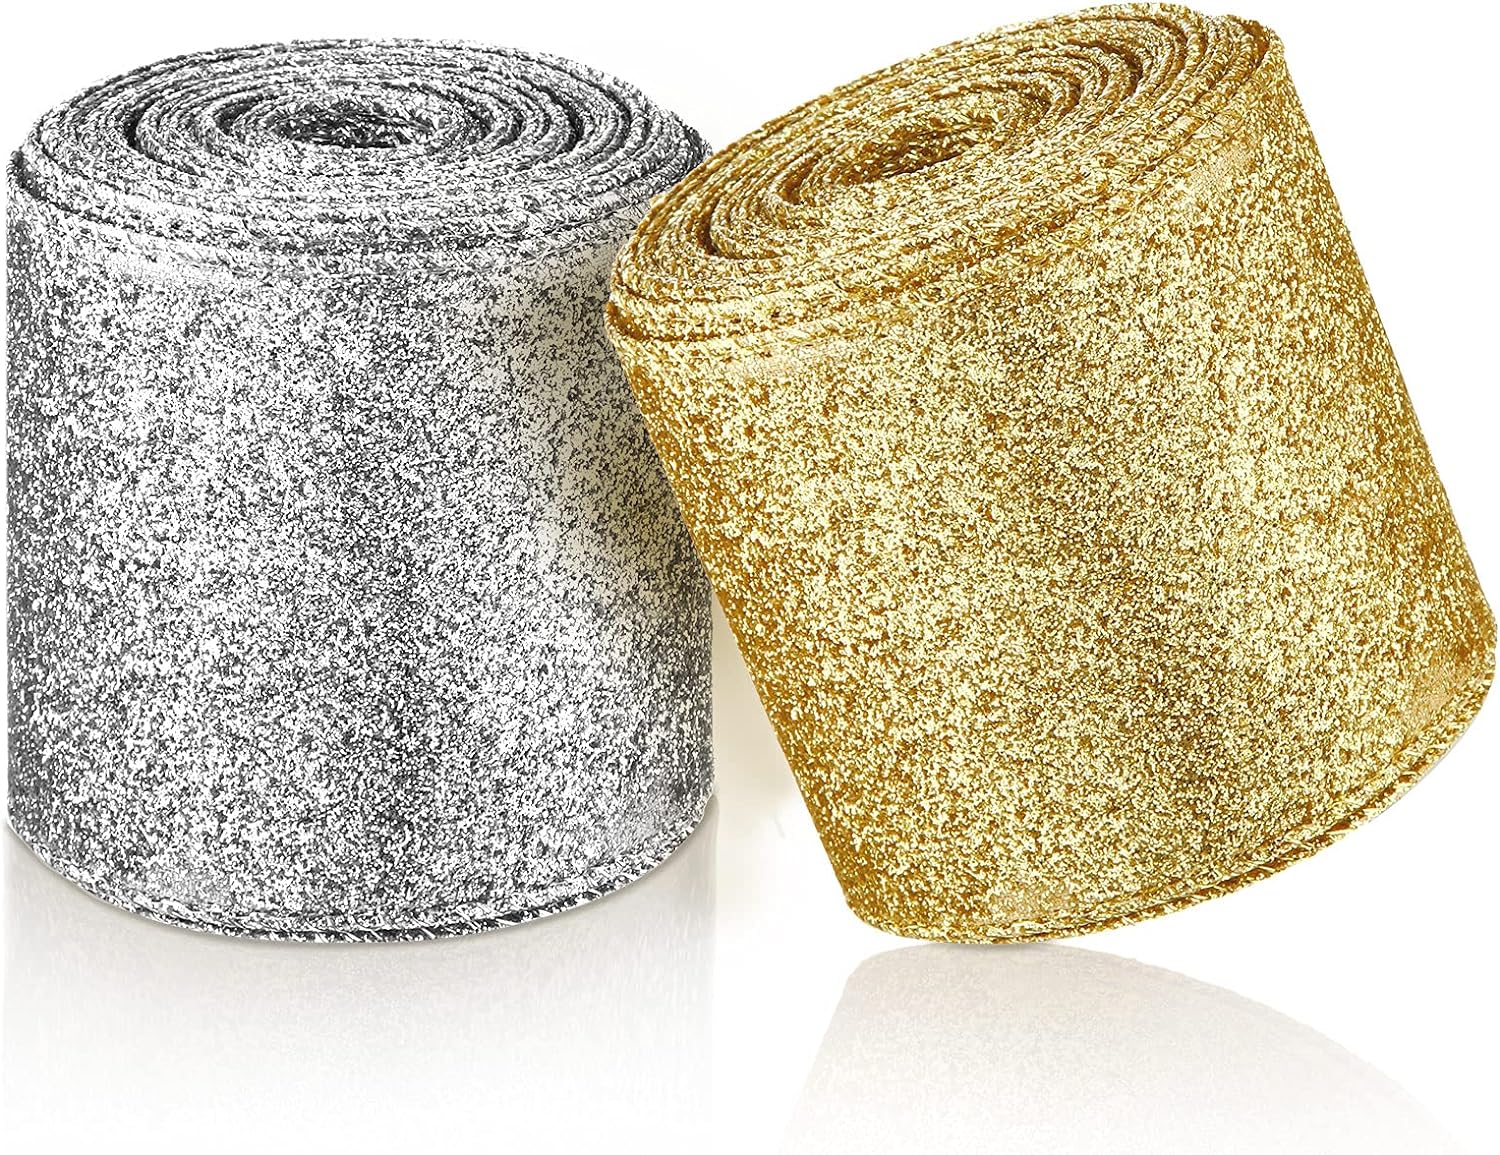 LEMO Metallic Glitter Ribbon Wired Edge Decorative Fabric Ribbons for Party Wrapping Home Decorations Wedding Birthday DIY Crafts 2.5 Inch (Gold, Silver)